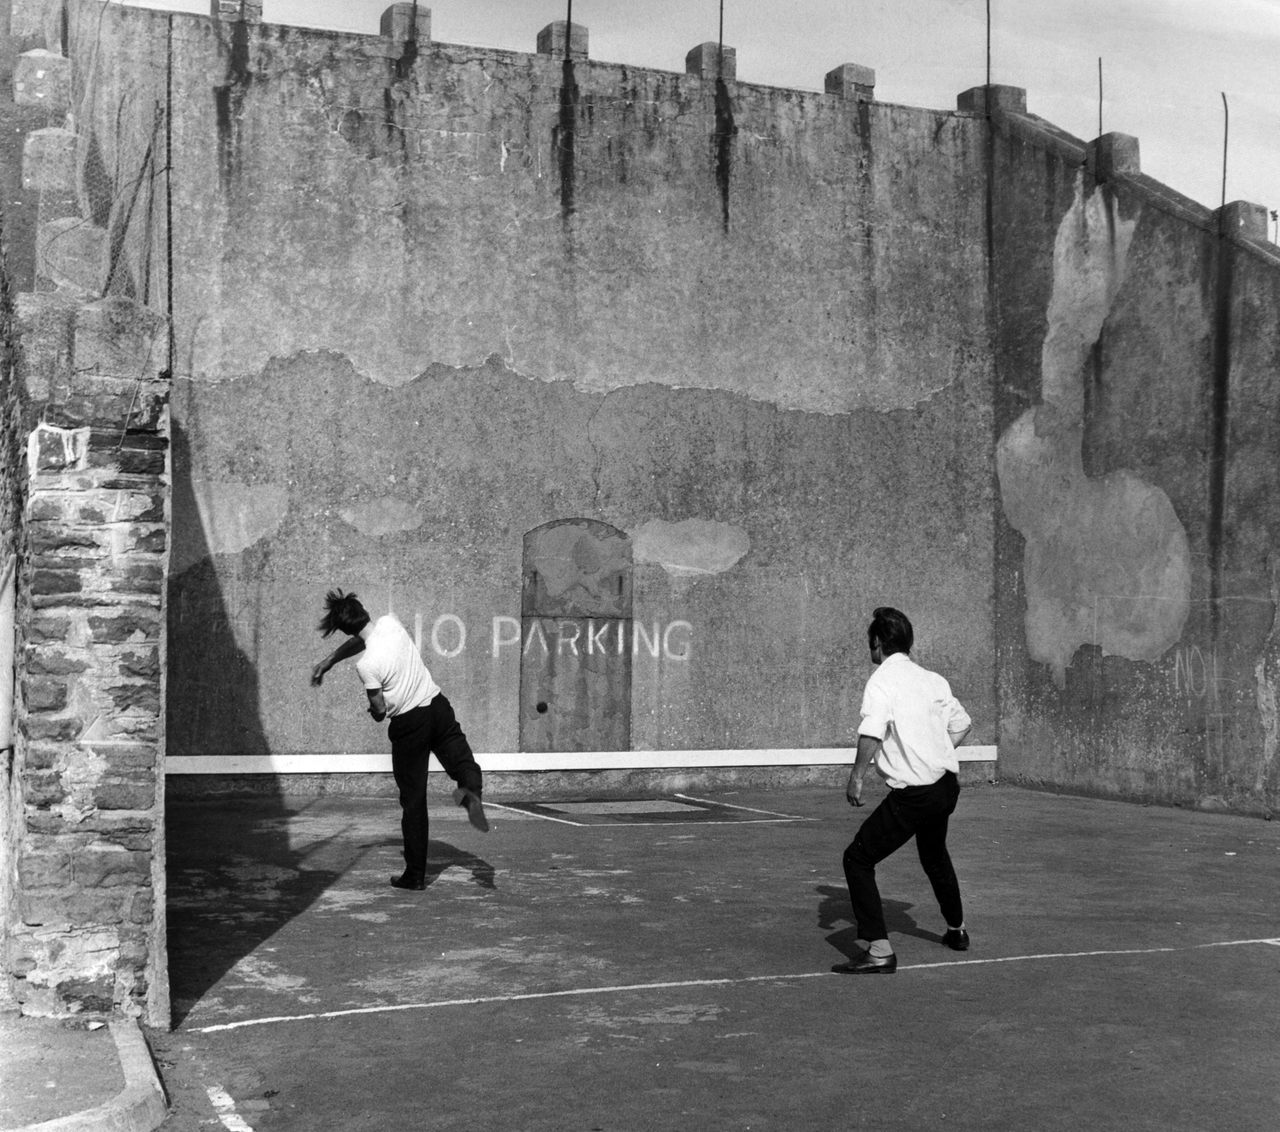 The handball court in Nelson, South Wales, August 8, 1969. The three-walled court and home to Pêl-Law, the Welsh version of the game, has stood in the town since 1860. 